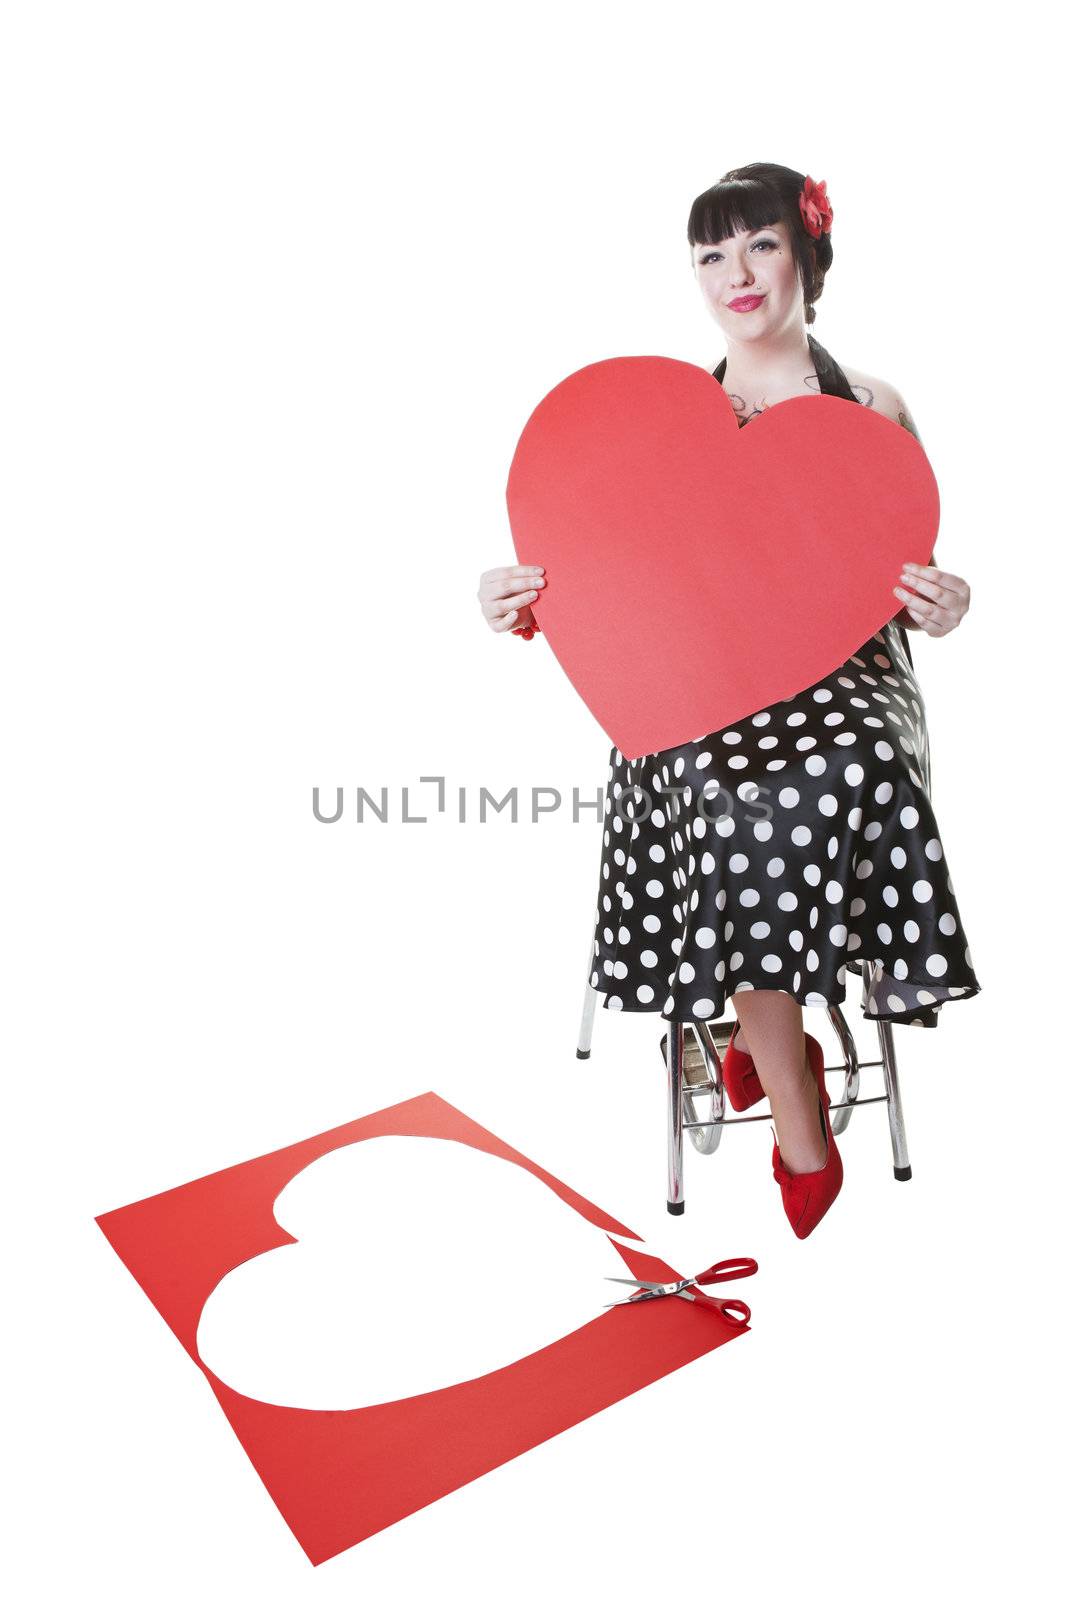 Valentine's day classic pinup girl pose, with a now rockabilly model.  Shot on white background.